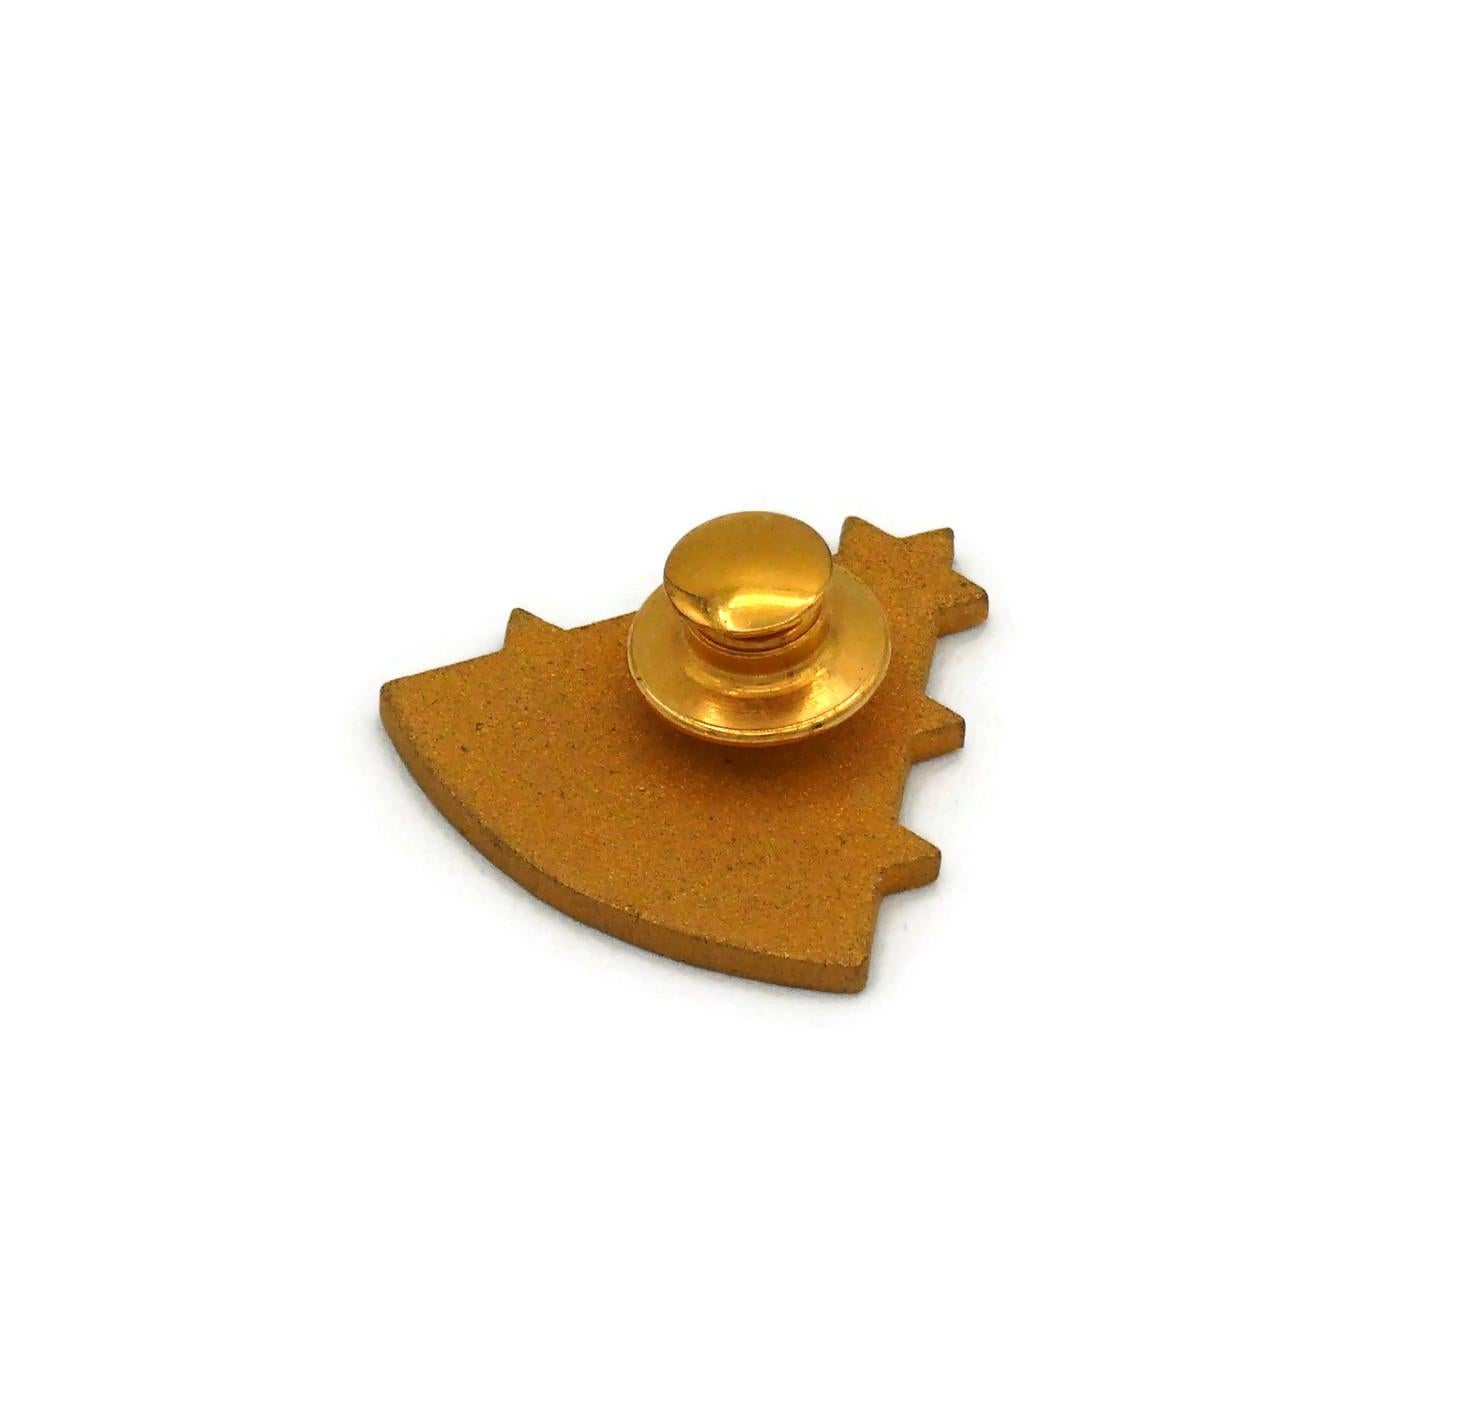 Women's or Men's HERMES Vintage Christmas Tree Pin Brooch, Limited Edition Noël 1999